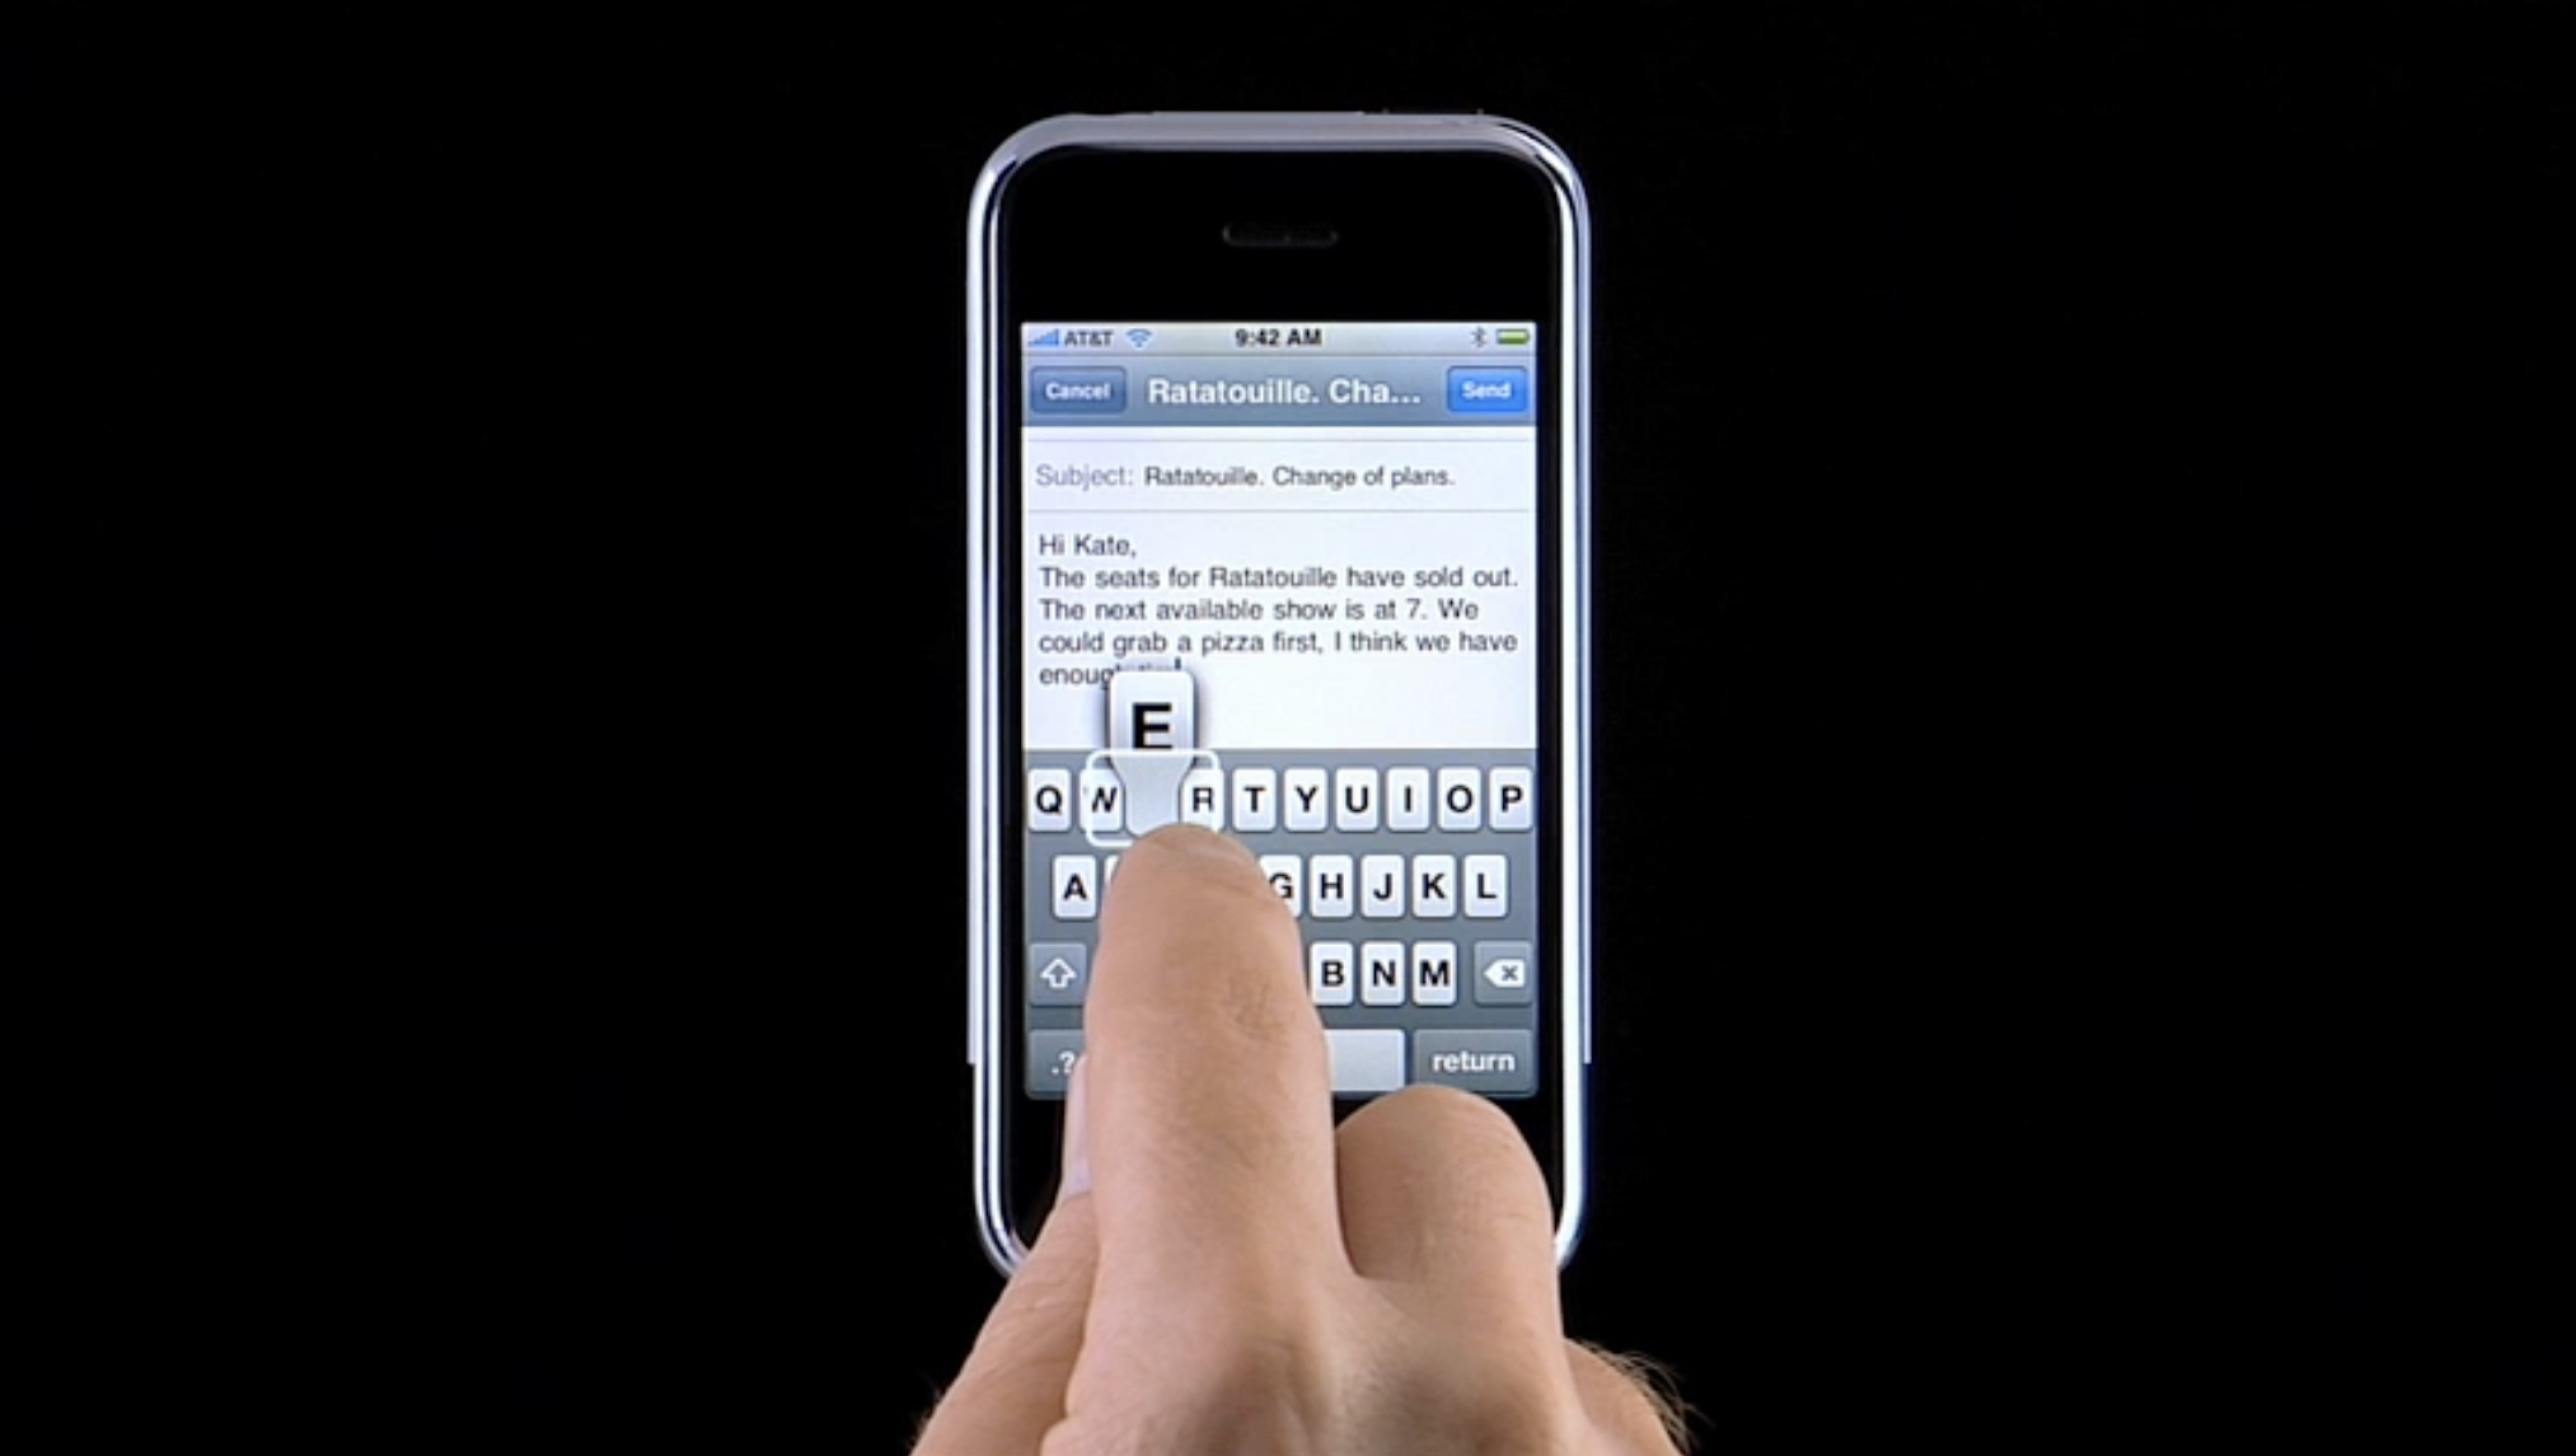 The final design of the keyboard used a familiar QWERTY layout and hid all the complexity of the touch targets and error correction behind the scenes. Image from Apple’s getting started series on the original iphone. Retrieved from the Internet Archive